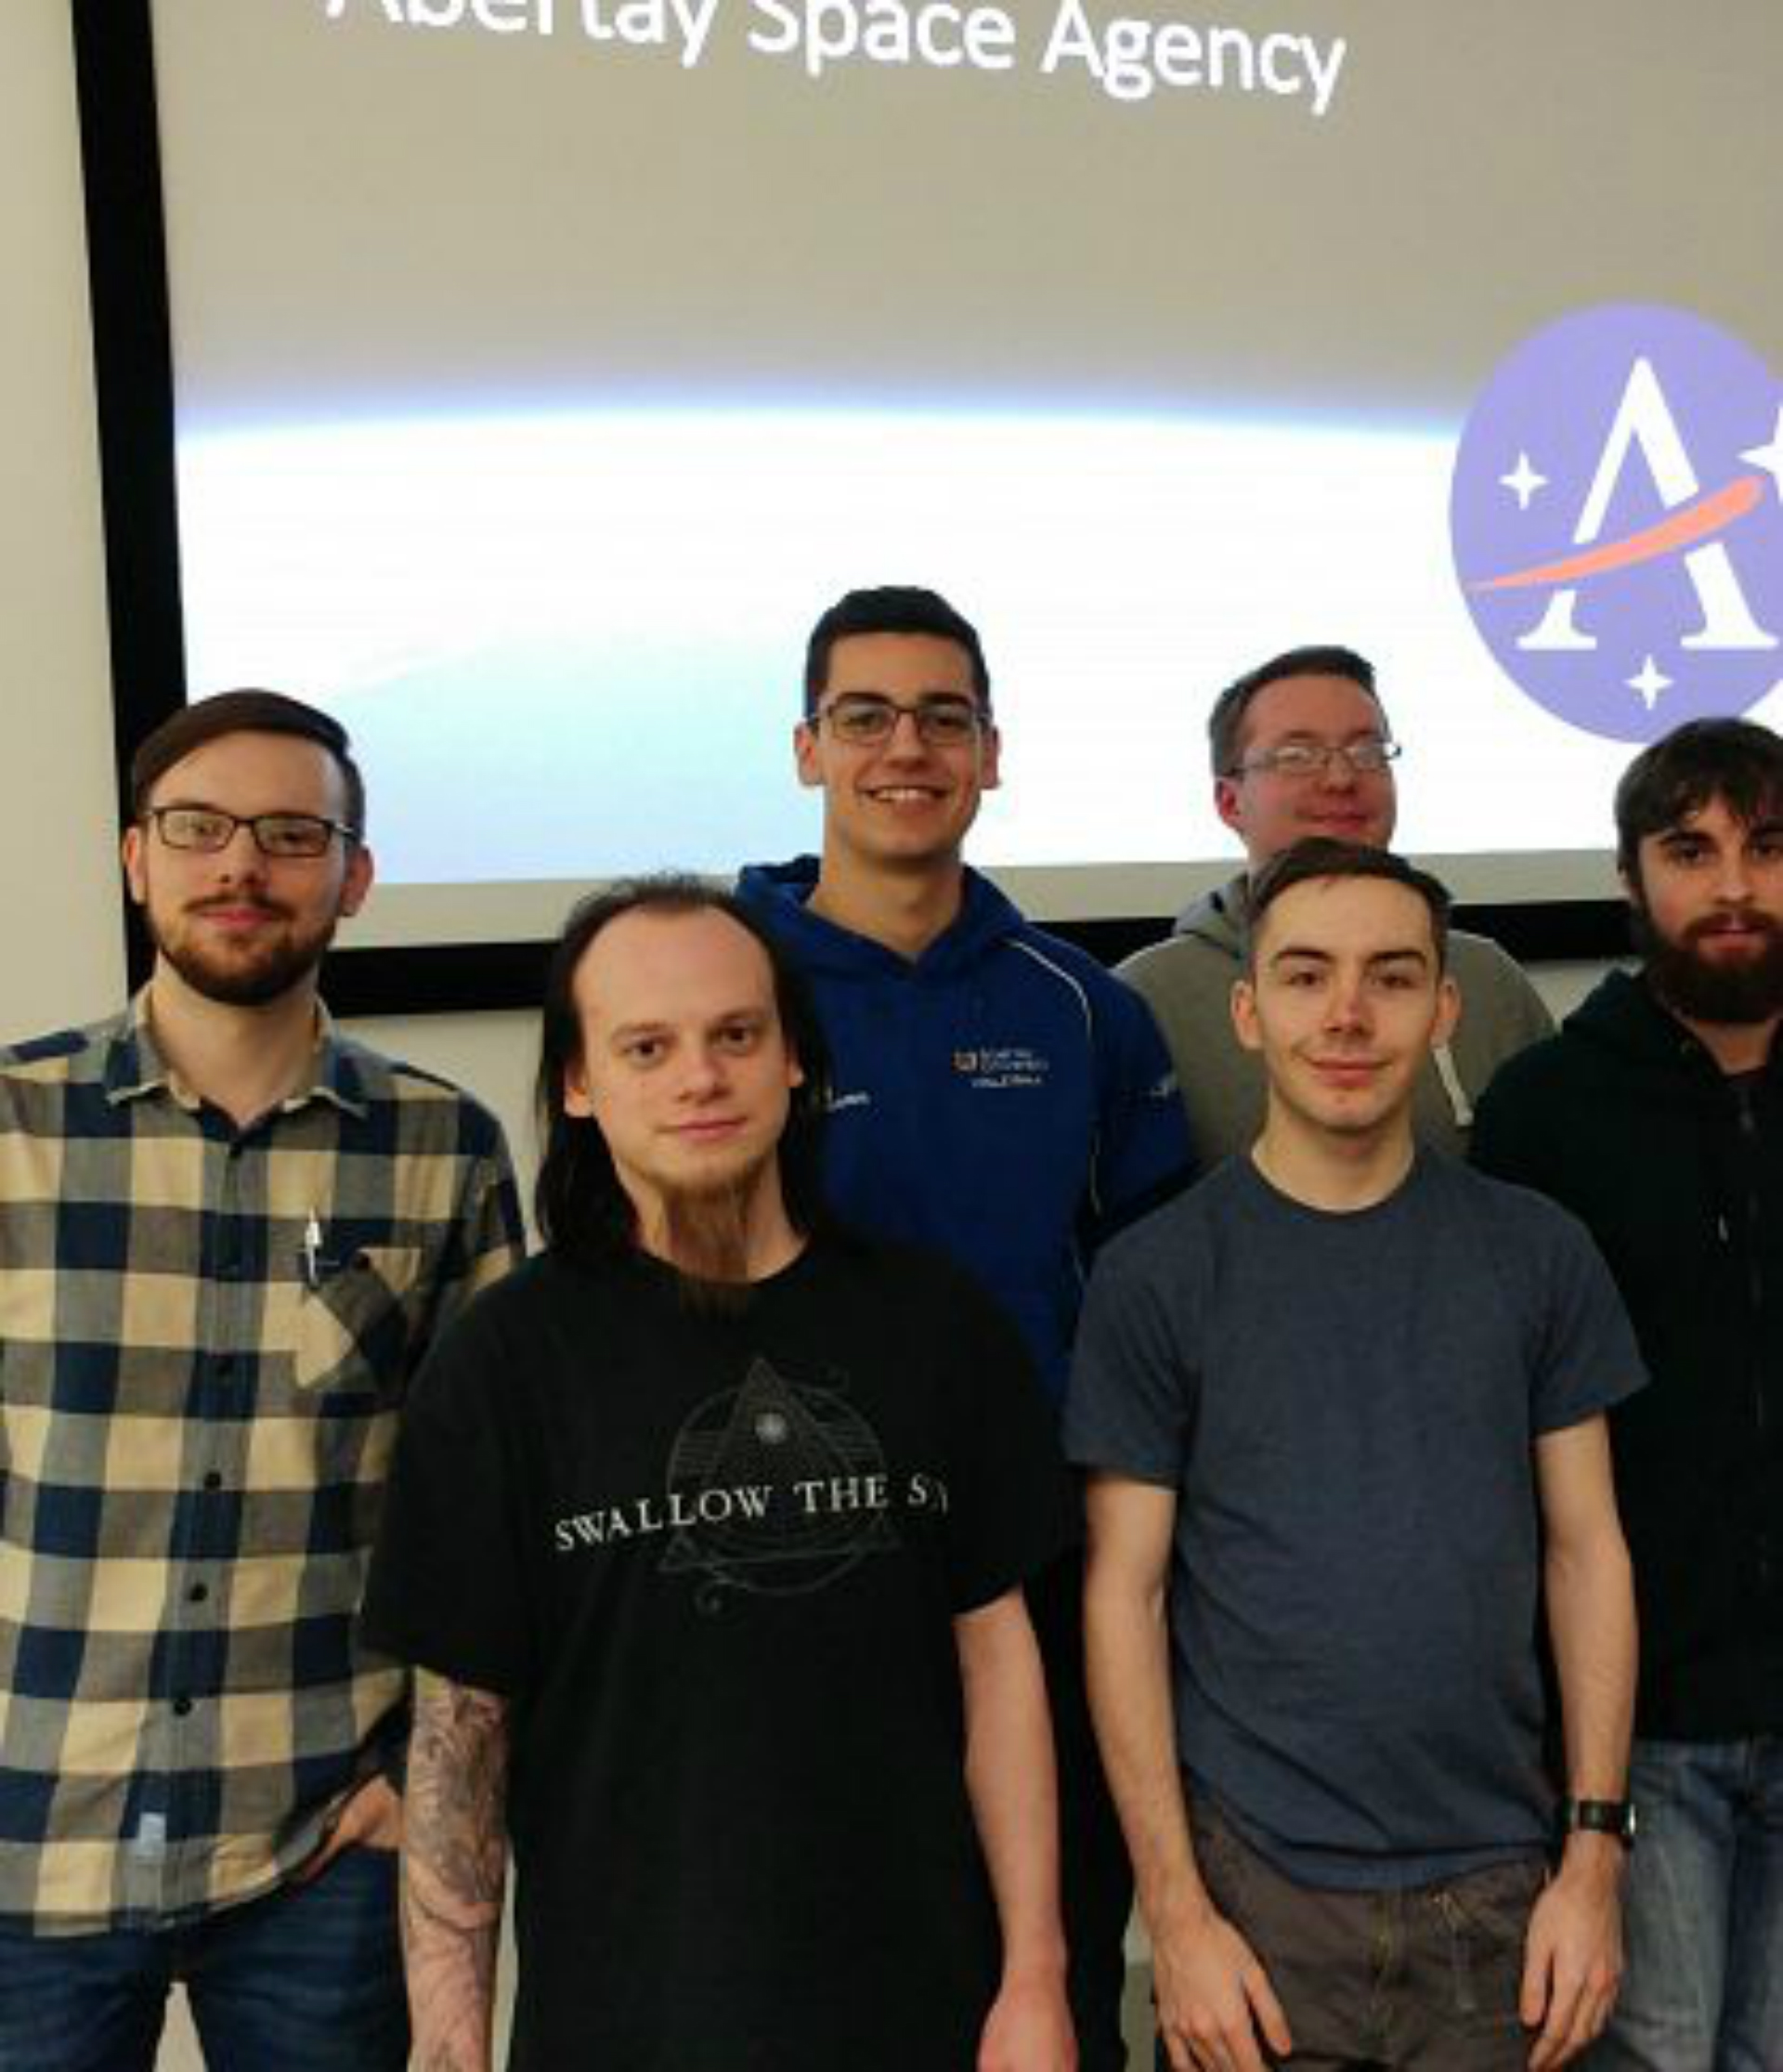 Abertay Space Agency chasing record